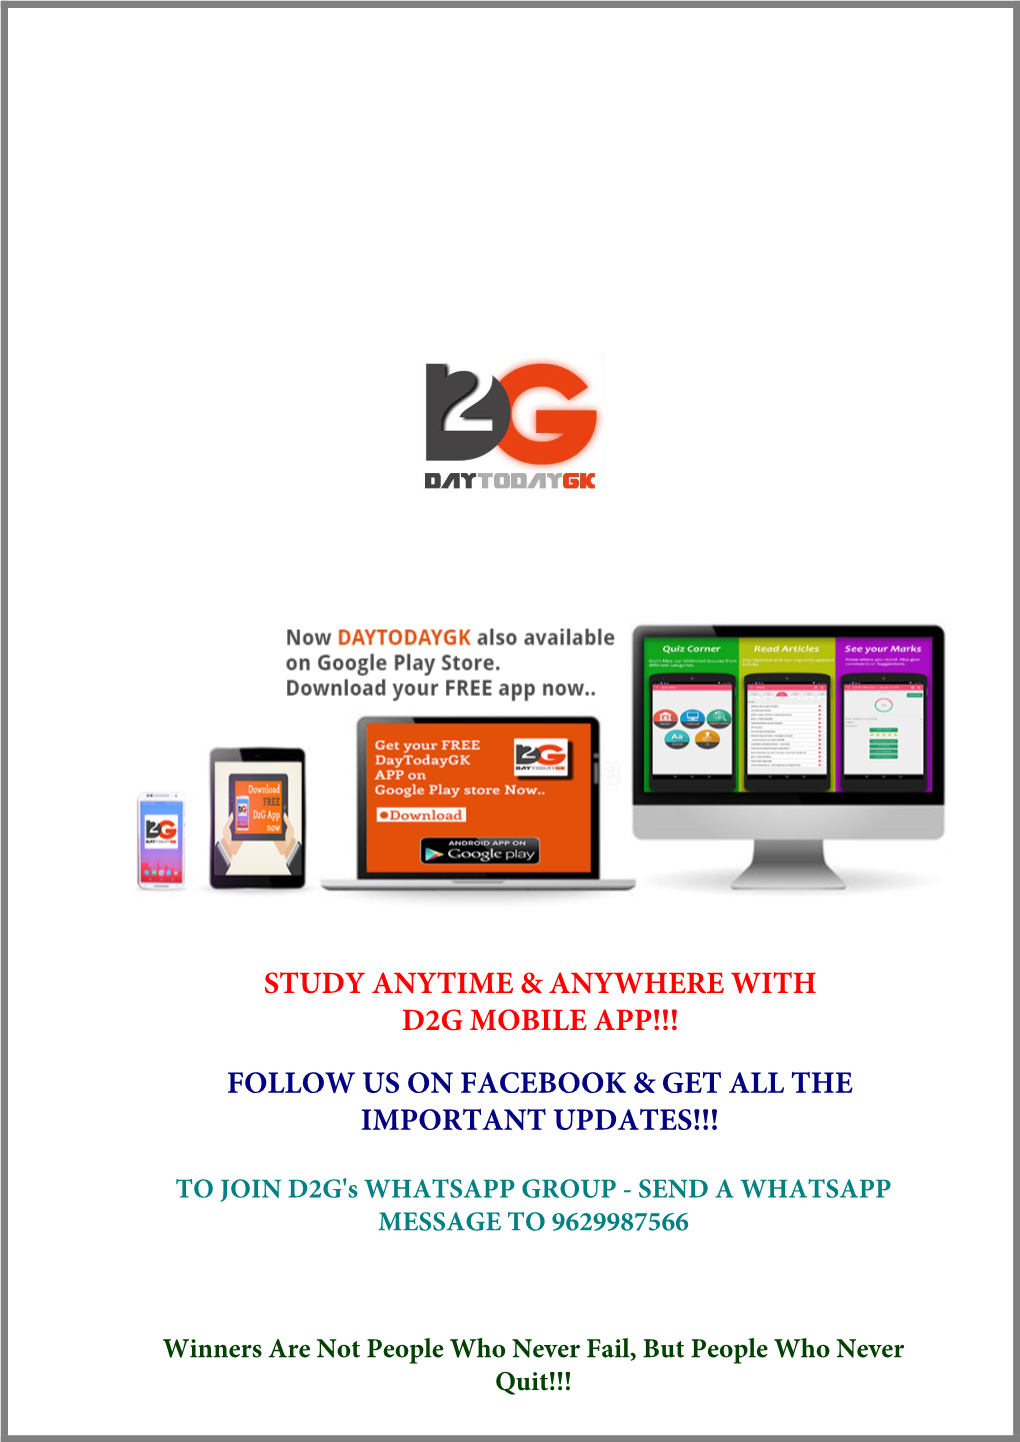 Study Anytime & Anywhere with D2g Mobile App!!! Follow